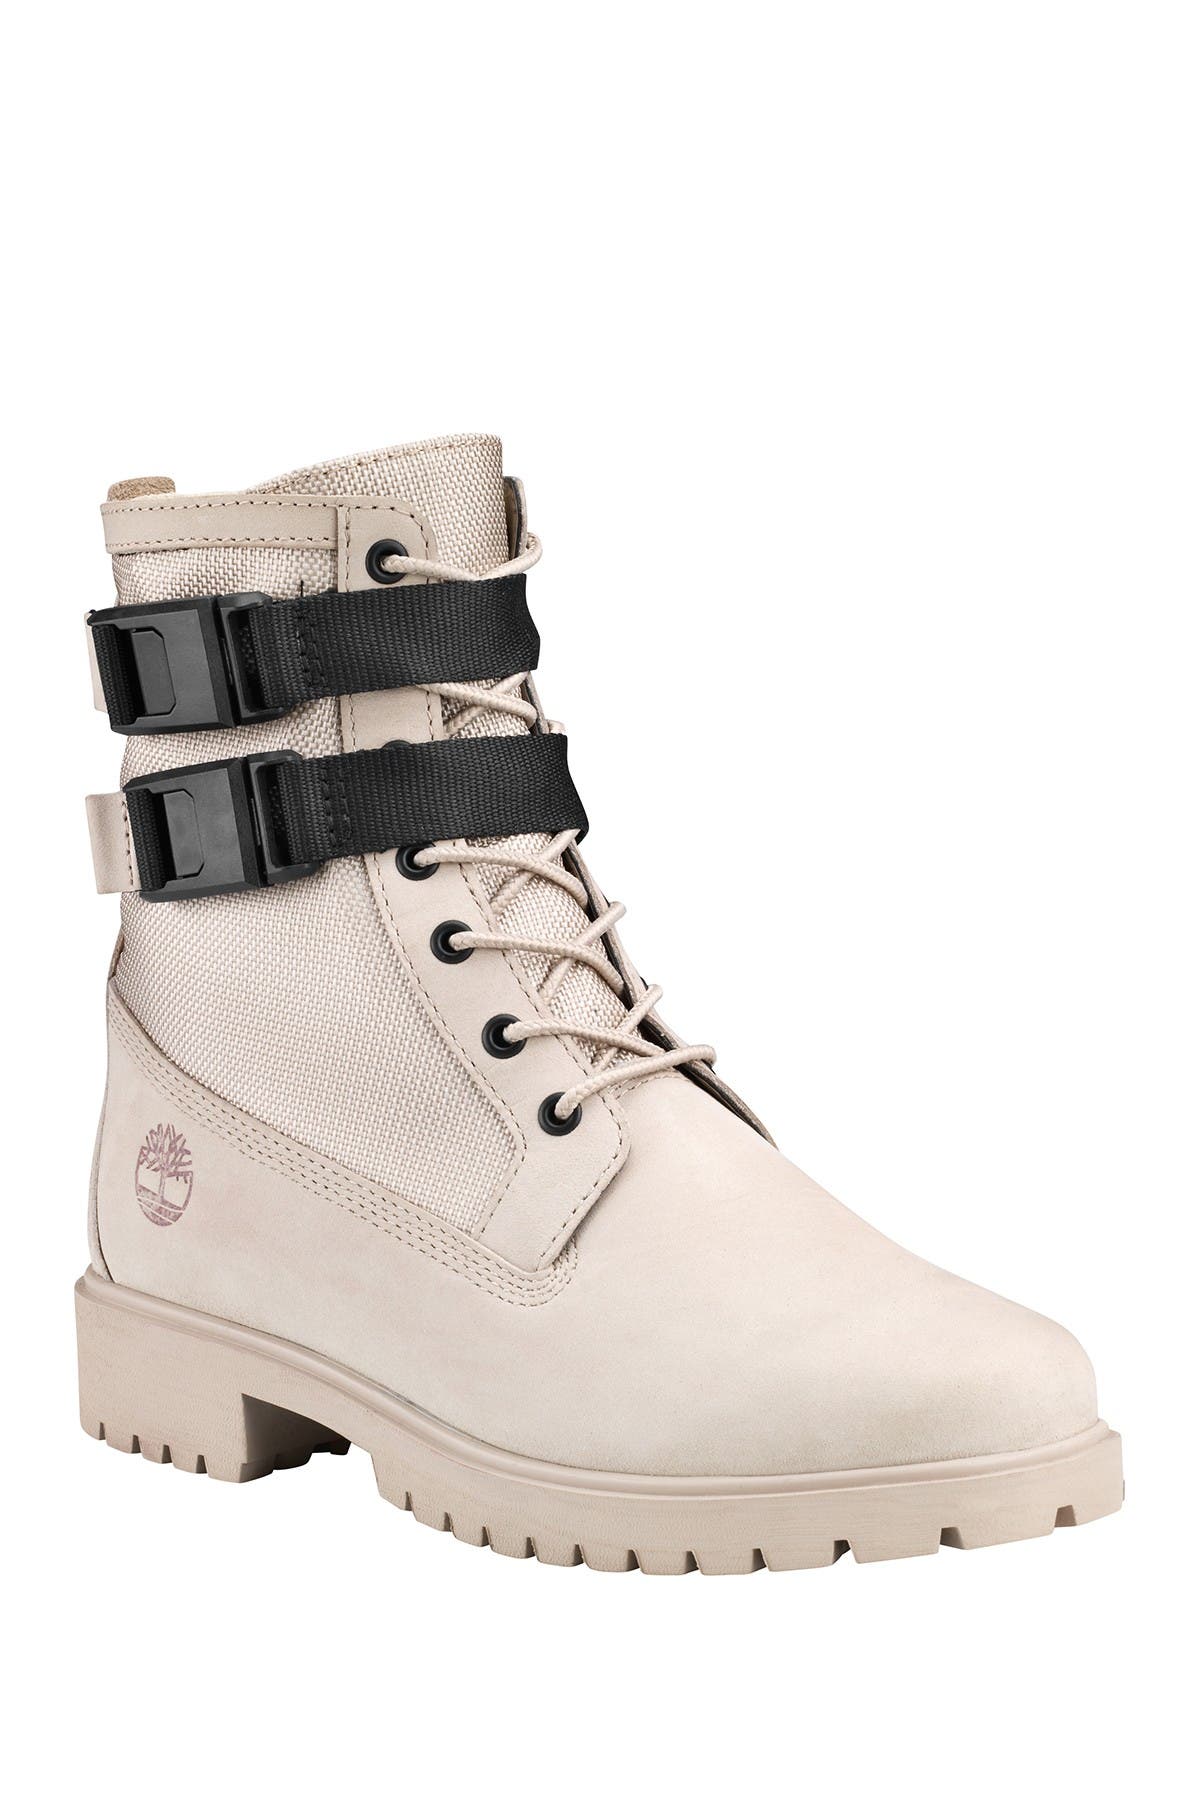 timberland double strap boots